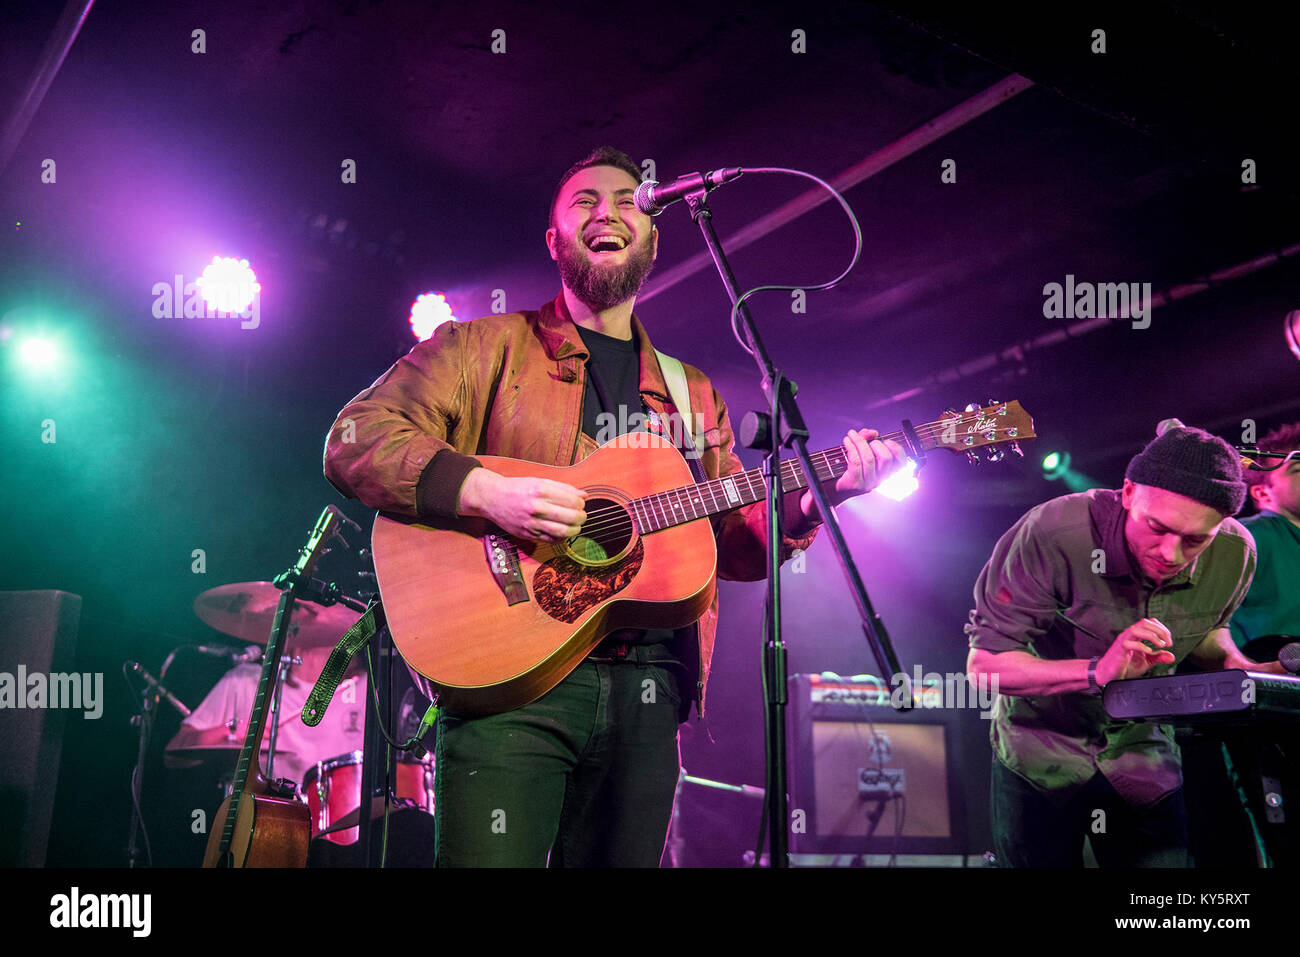 Manchester, UK. 13th January 2018. Ralph Pelleymounter,  James Ball,  Josh Taffel, Grant McNeill and Ben Jackson of To Kill A King perform at the Academy 3 in Manchester 13/01/2018 Credit: Gary Mather/Alamy Live News Stock Photo